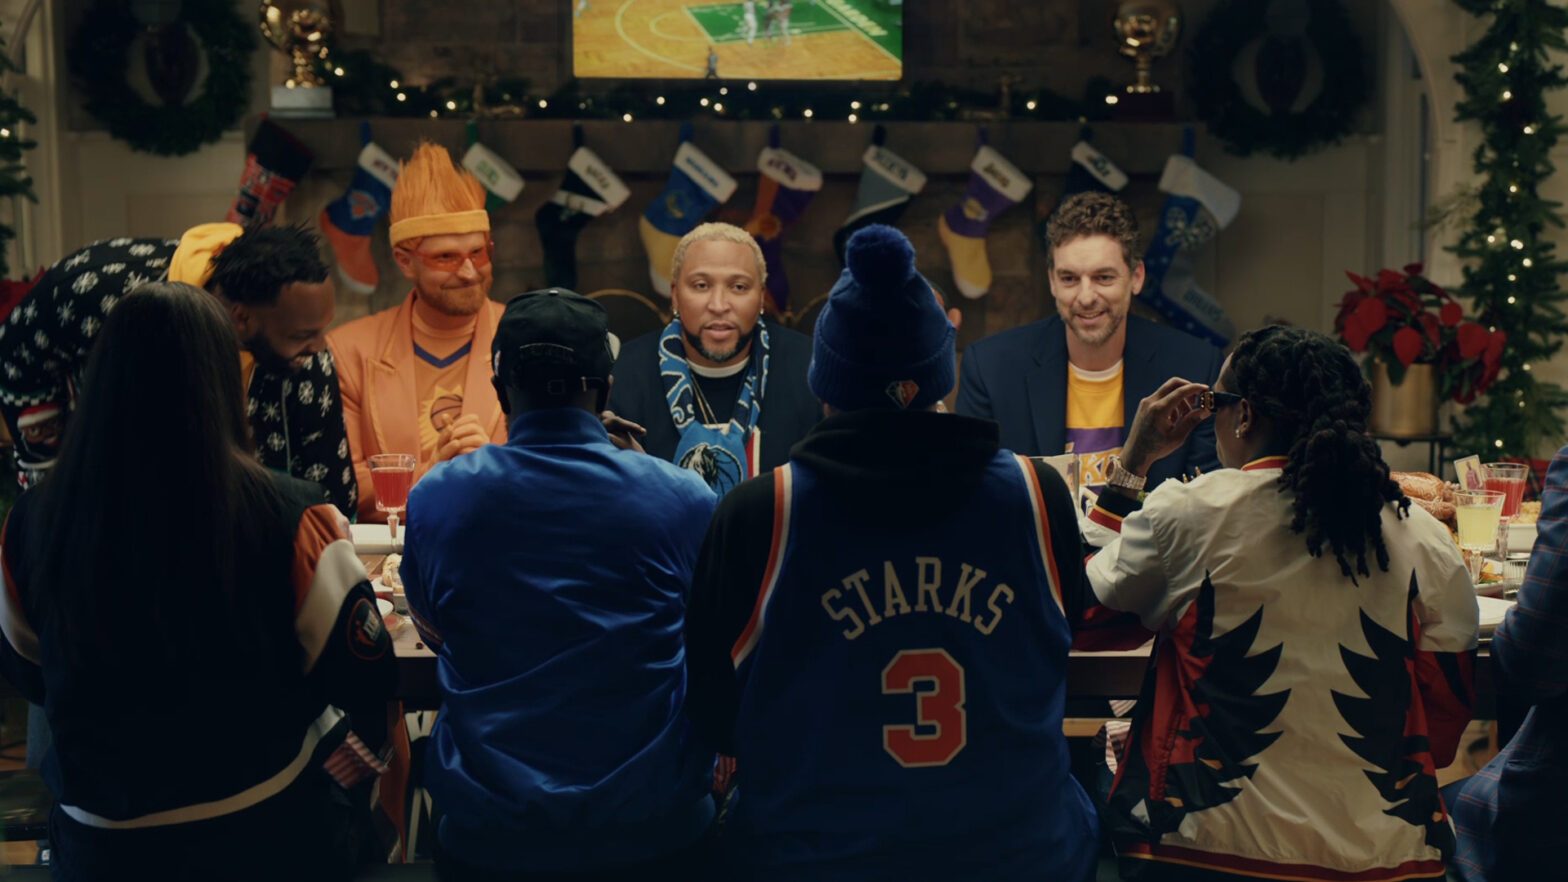 Mr. ORNG represents Suns fans in NBA's Christmas Day TV ad